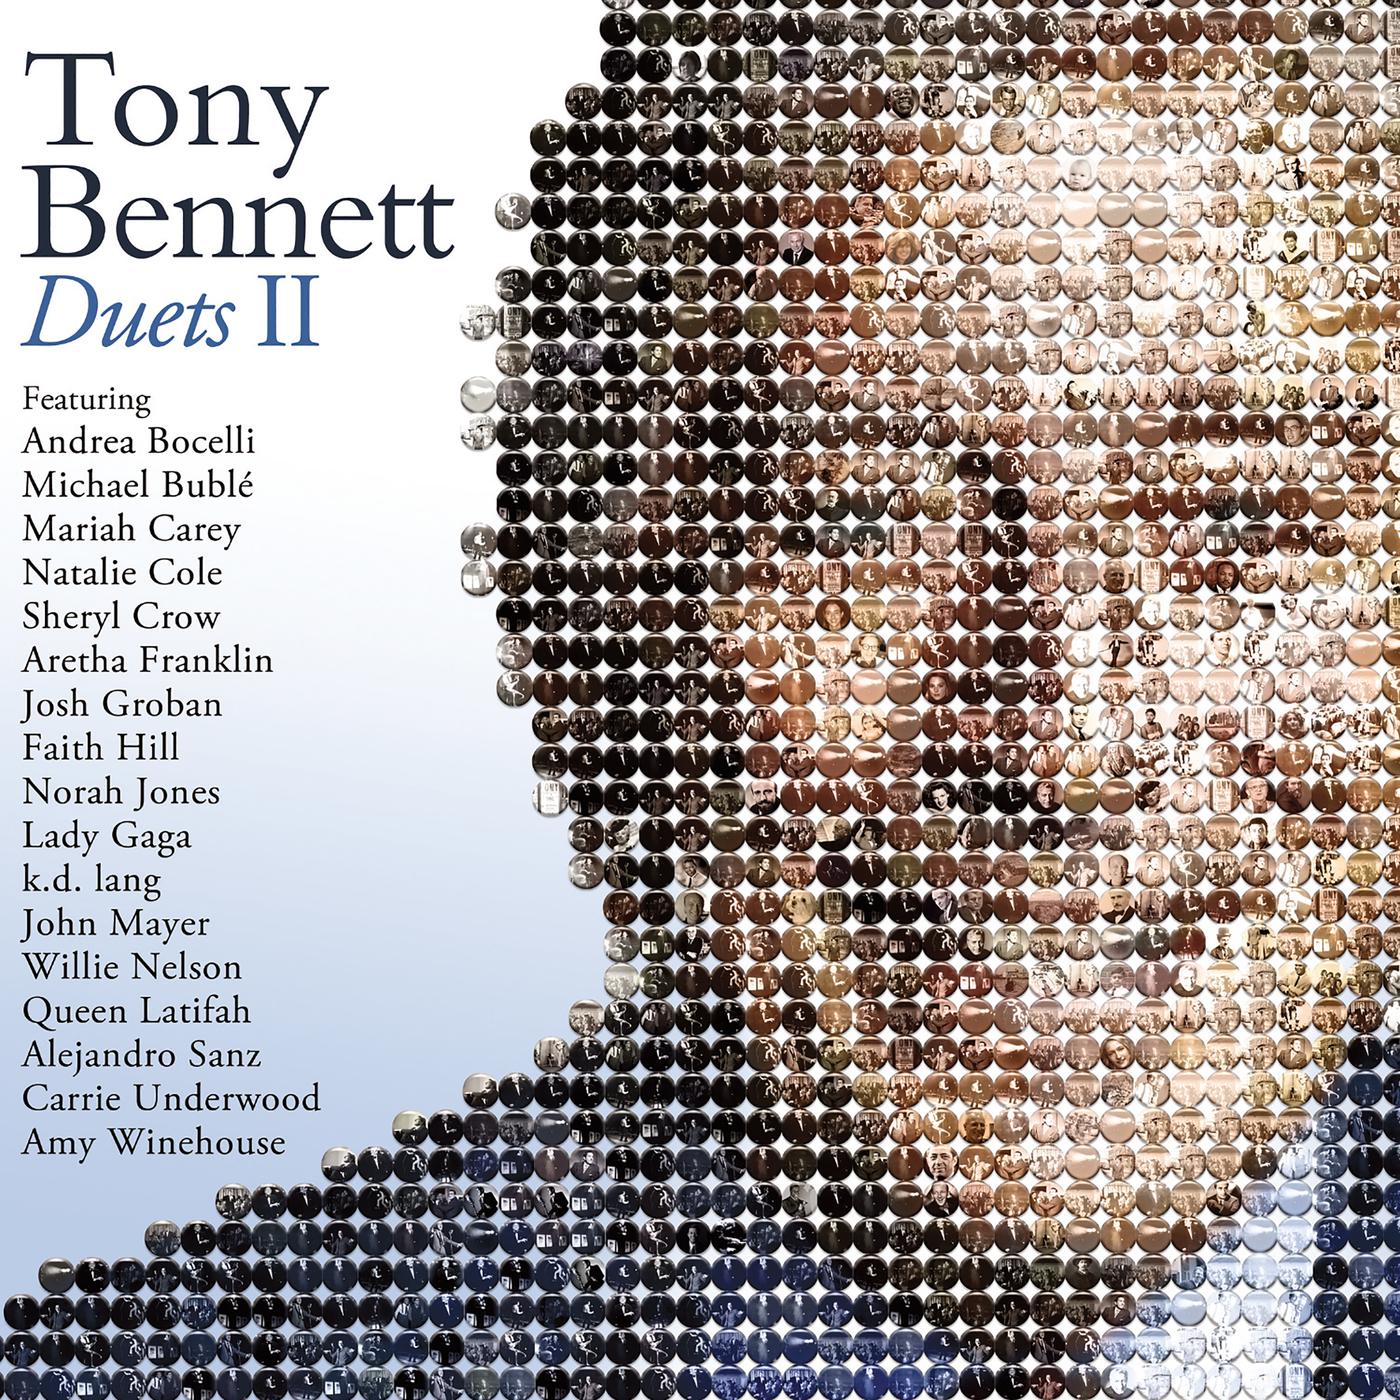 Don't Get Around Much Anymore歌词 歌手Tony Bennett / Michael Bublé-专辑Duets II-单曲《Don't Get Around Much Anymore》LRC歌词下载